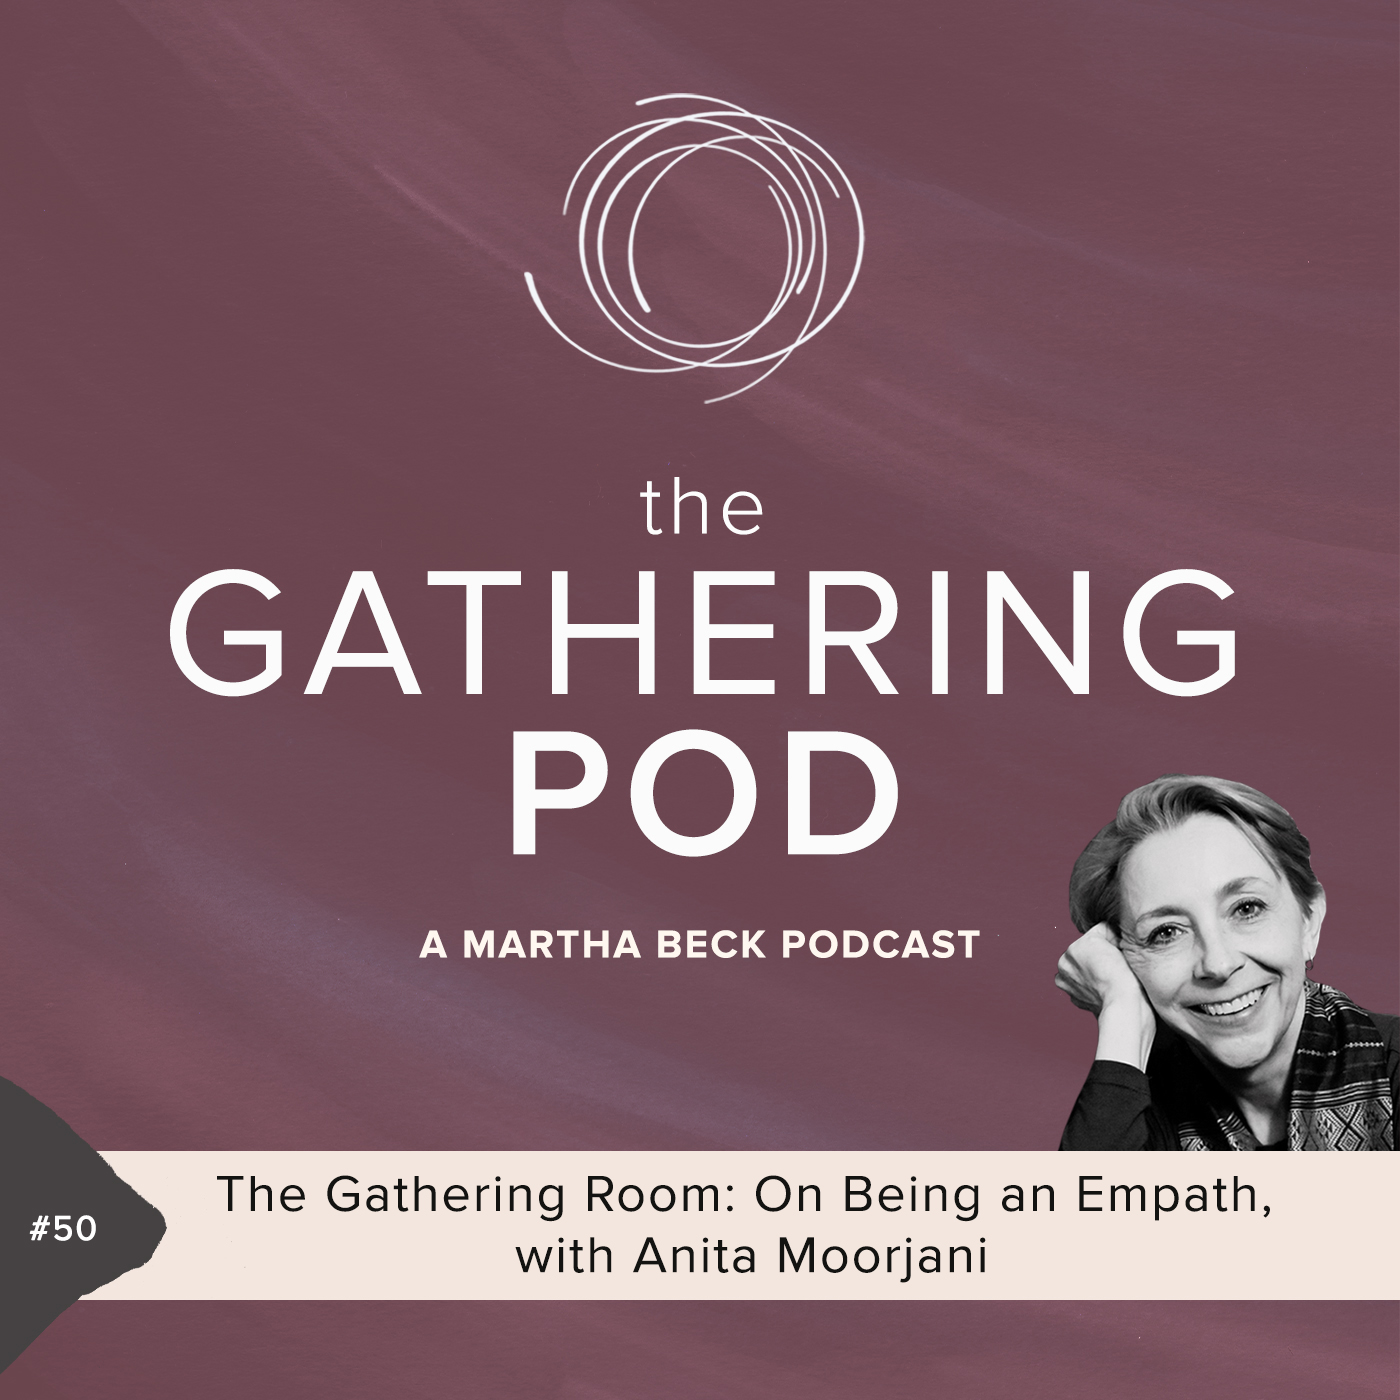 Image for The Gathering Pod A Martha Beck Podcast Episode #50 The Gathering Room: On Being an Empath, with Anita Moorjani